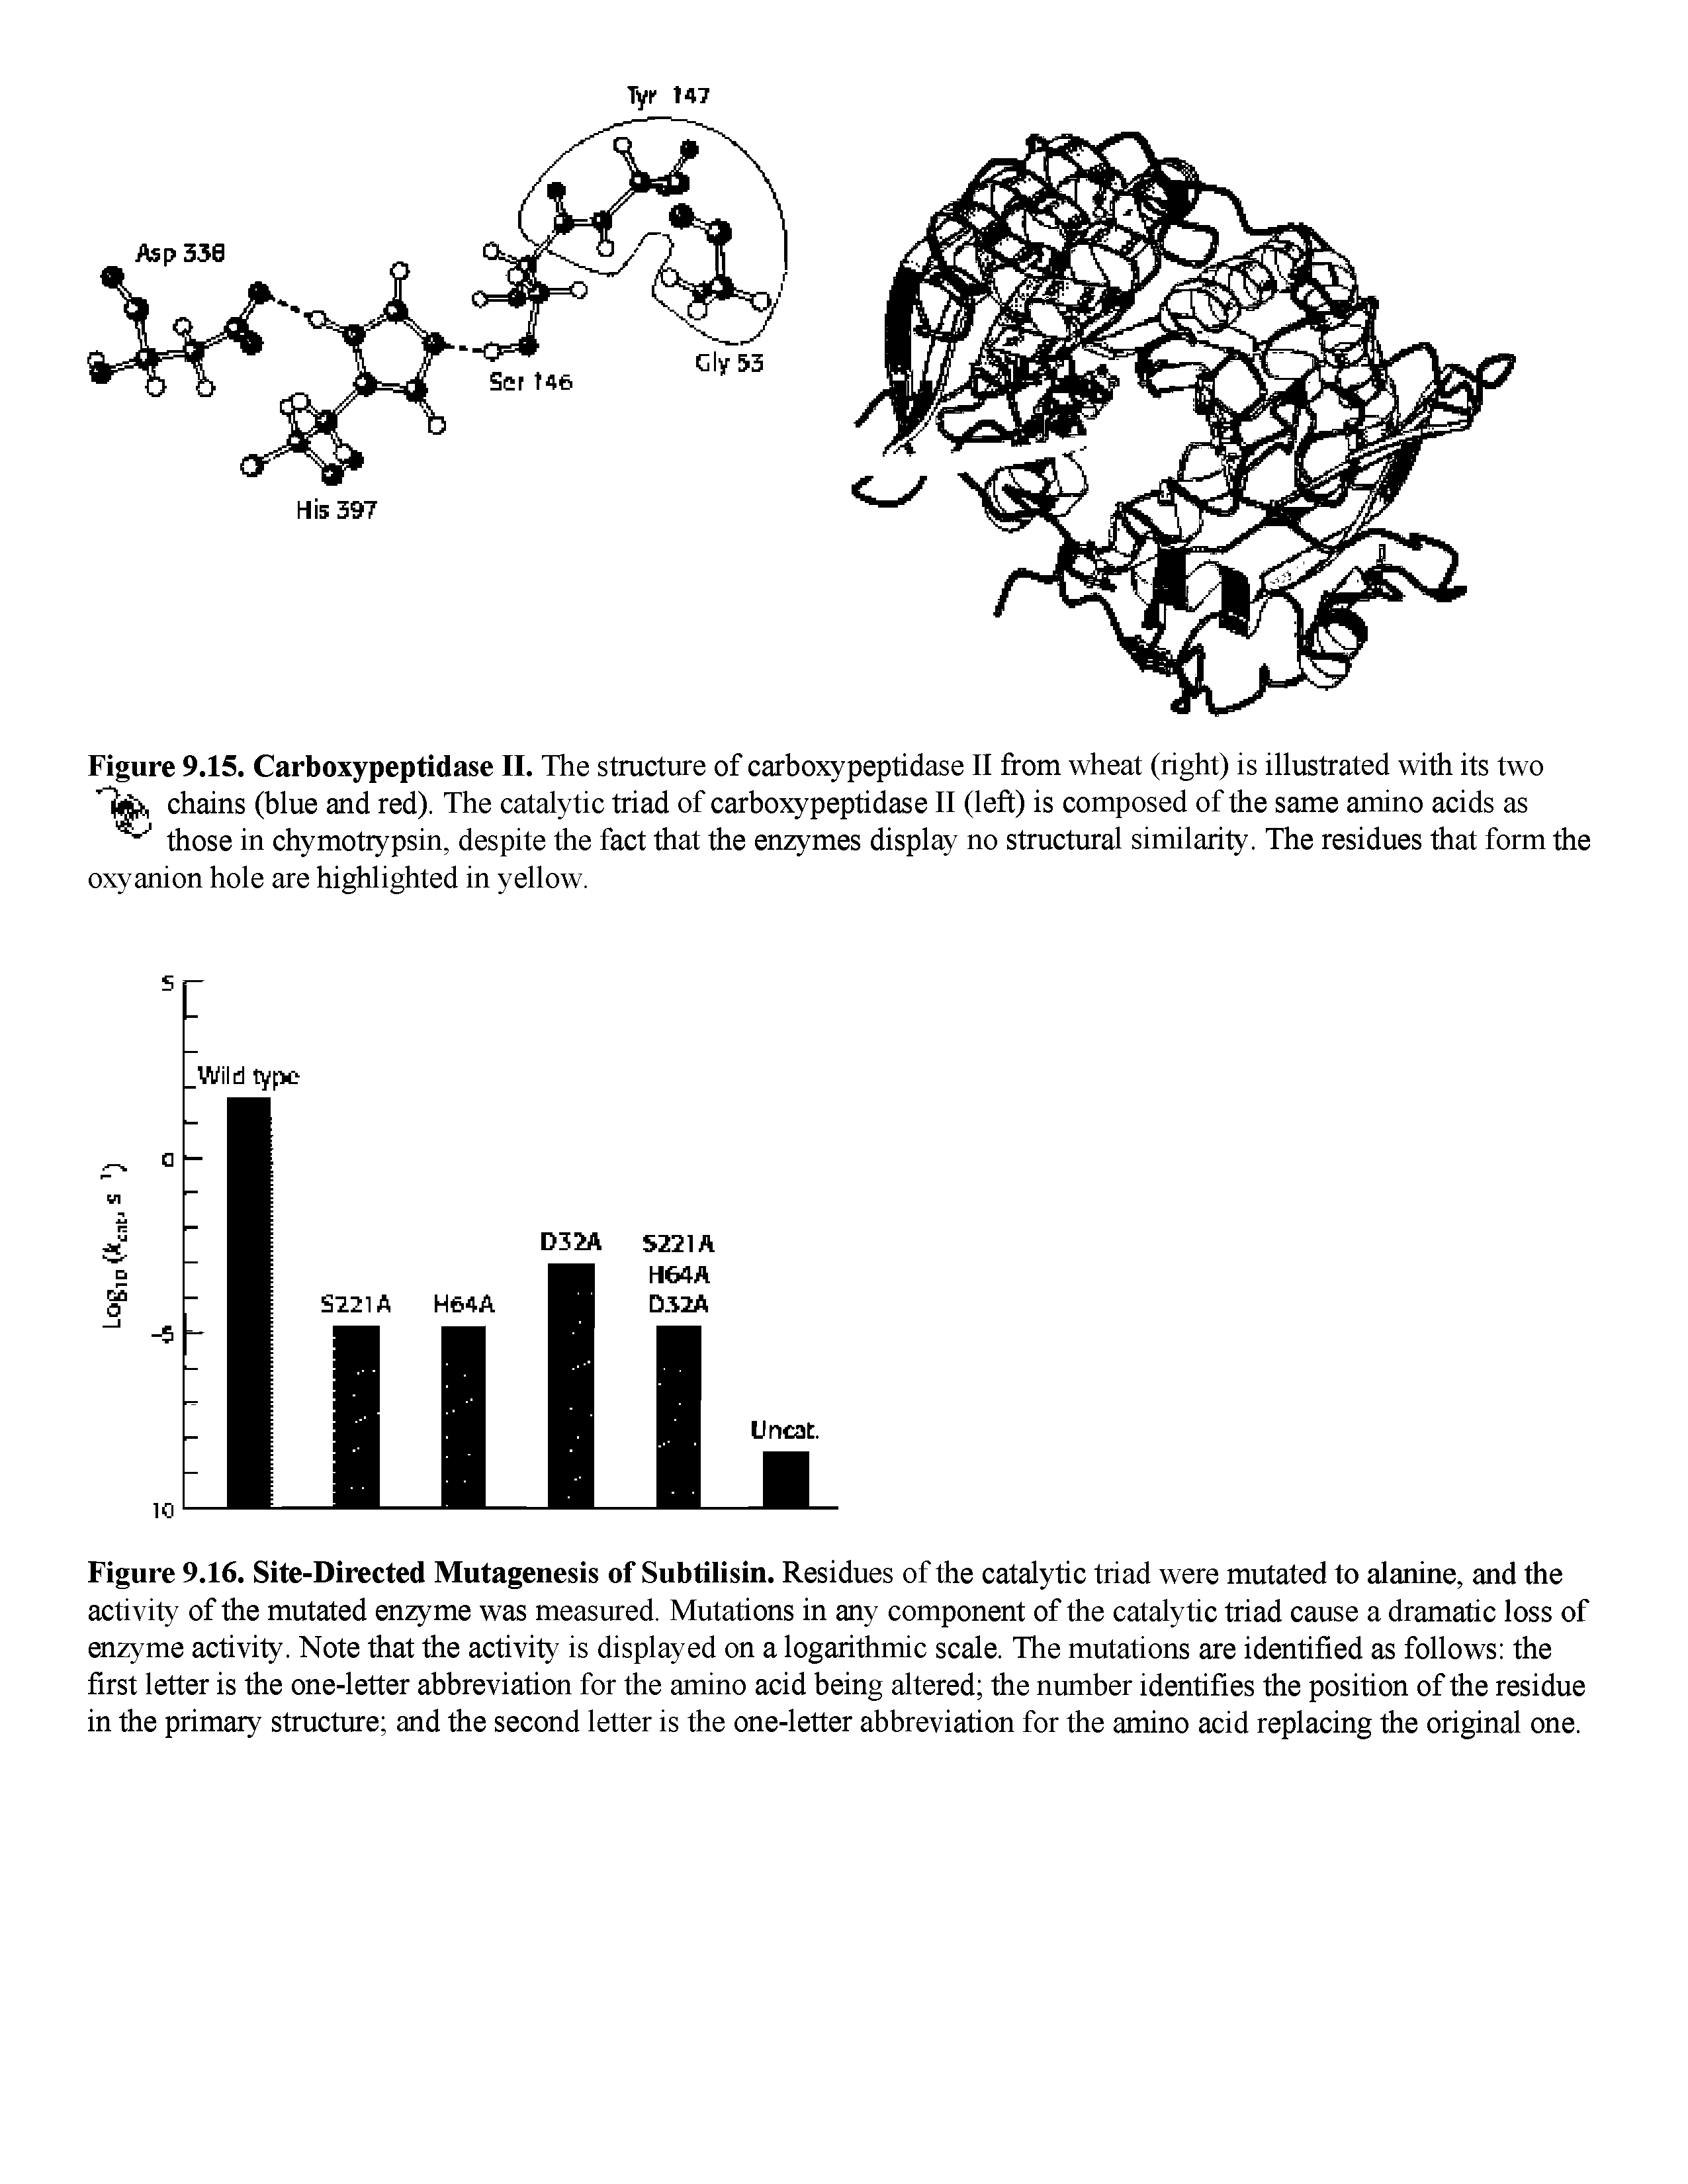 Figure 9.16. Site-Directed Mutagenesis of Subtilisin. Residues of the catalytic triad were mutated to alanine, and the activity of the mutated enzyme was measured. Mutations in any component of the catalytic triad cause a dramatic loss of enzyme activity. Note that the activity is displayed on a logarithmic scale. The mutations are identified as follows the first letter is the one-letter abbreviation for the amino acid being altered the number identifies the position of the residue in the primary structure and the second letter is the one-letter abbreviation for the amino acid replacing the original one.